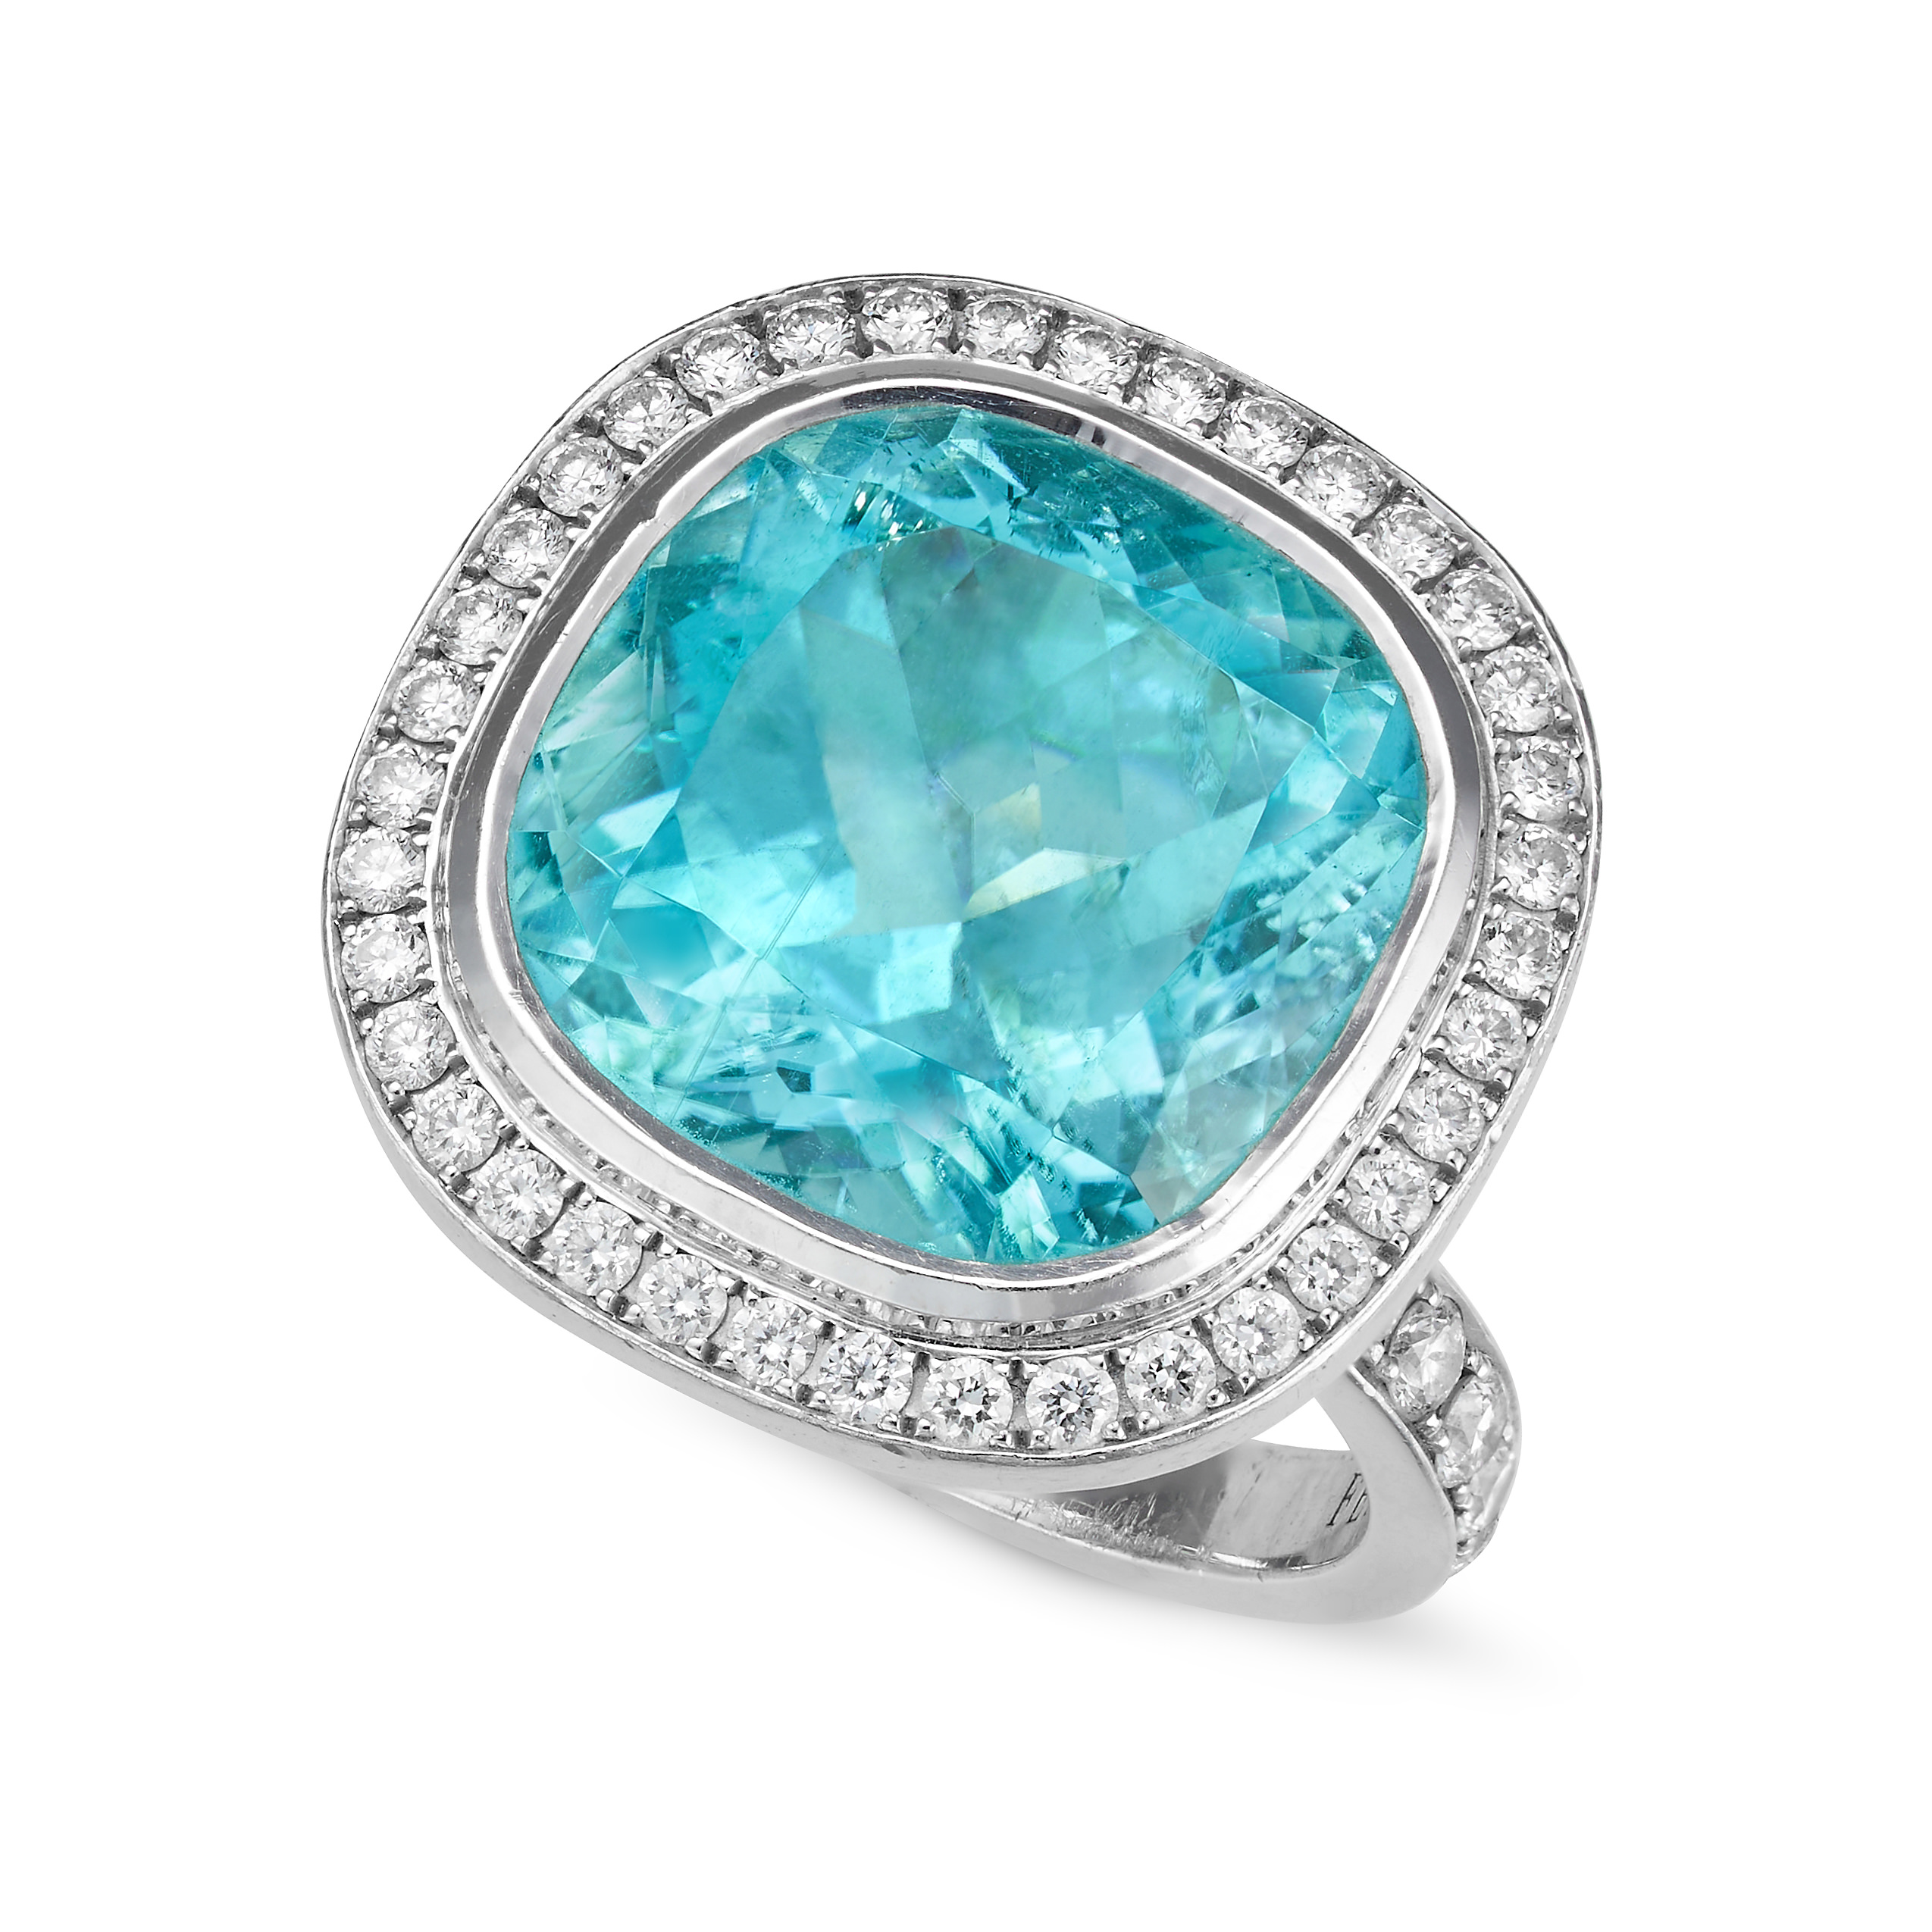 THEO FENNELL, A 11.43 CARAT PARAIBA TOURMALINE AND DIAMOND RING in 18ct white gold, set with a cu...